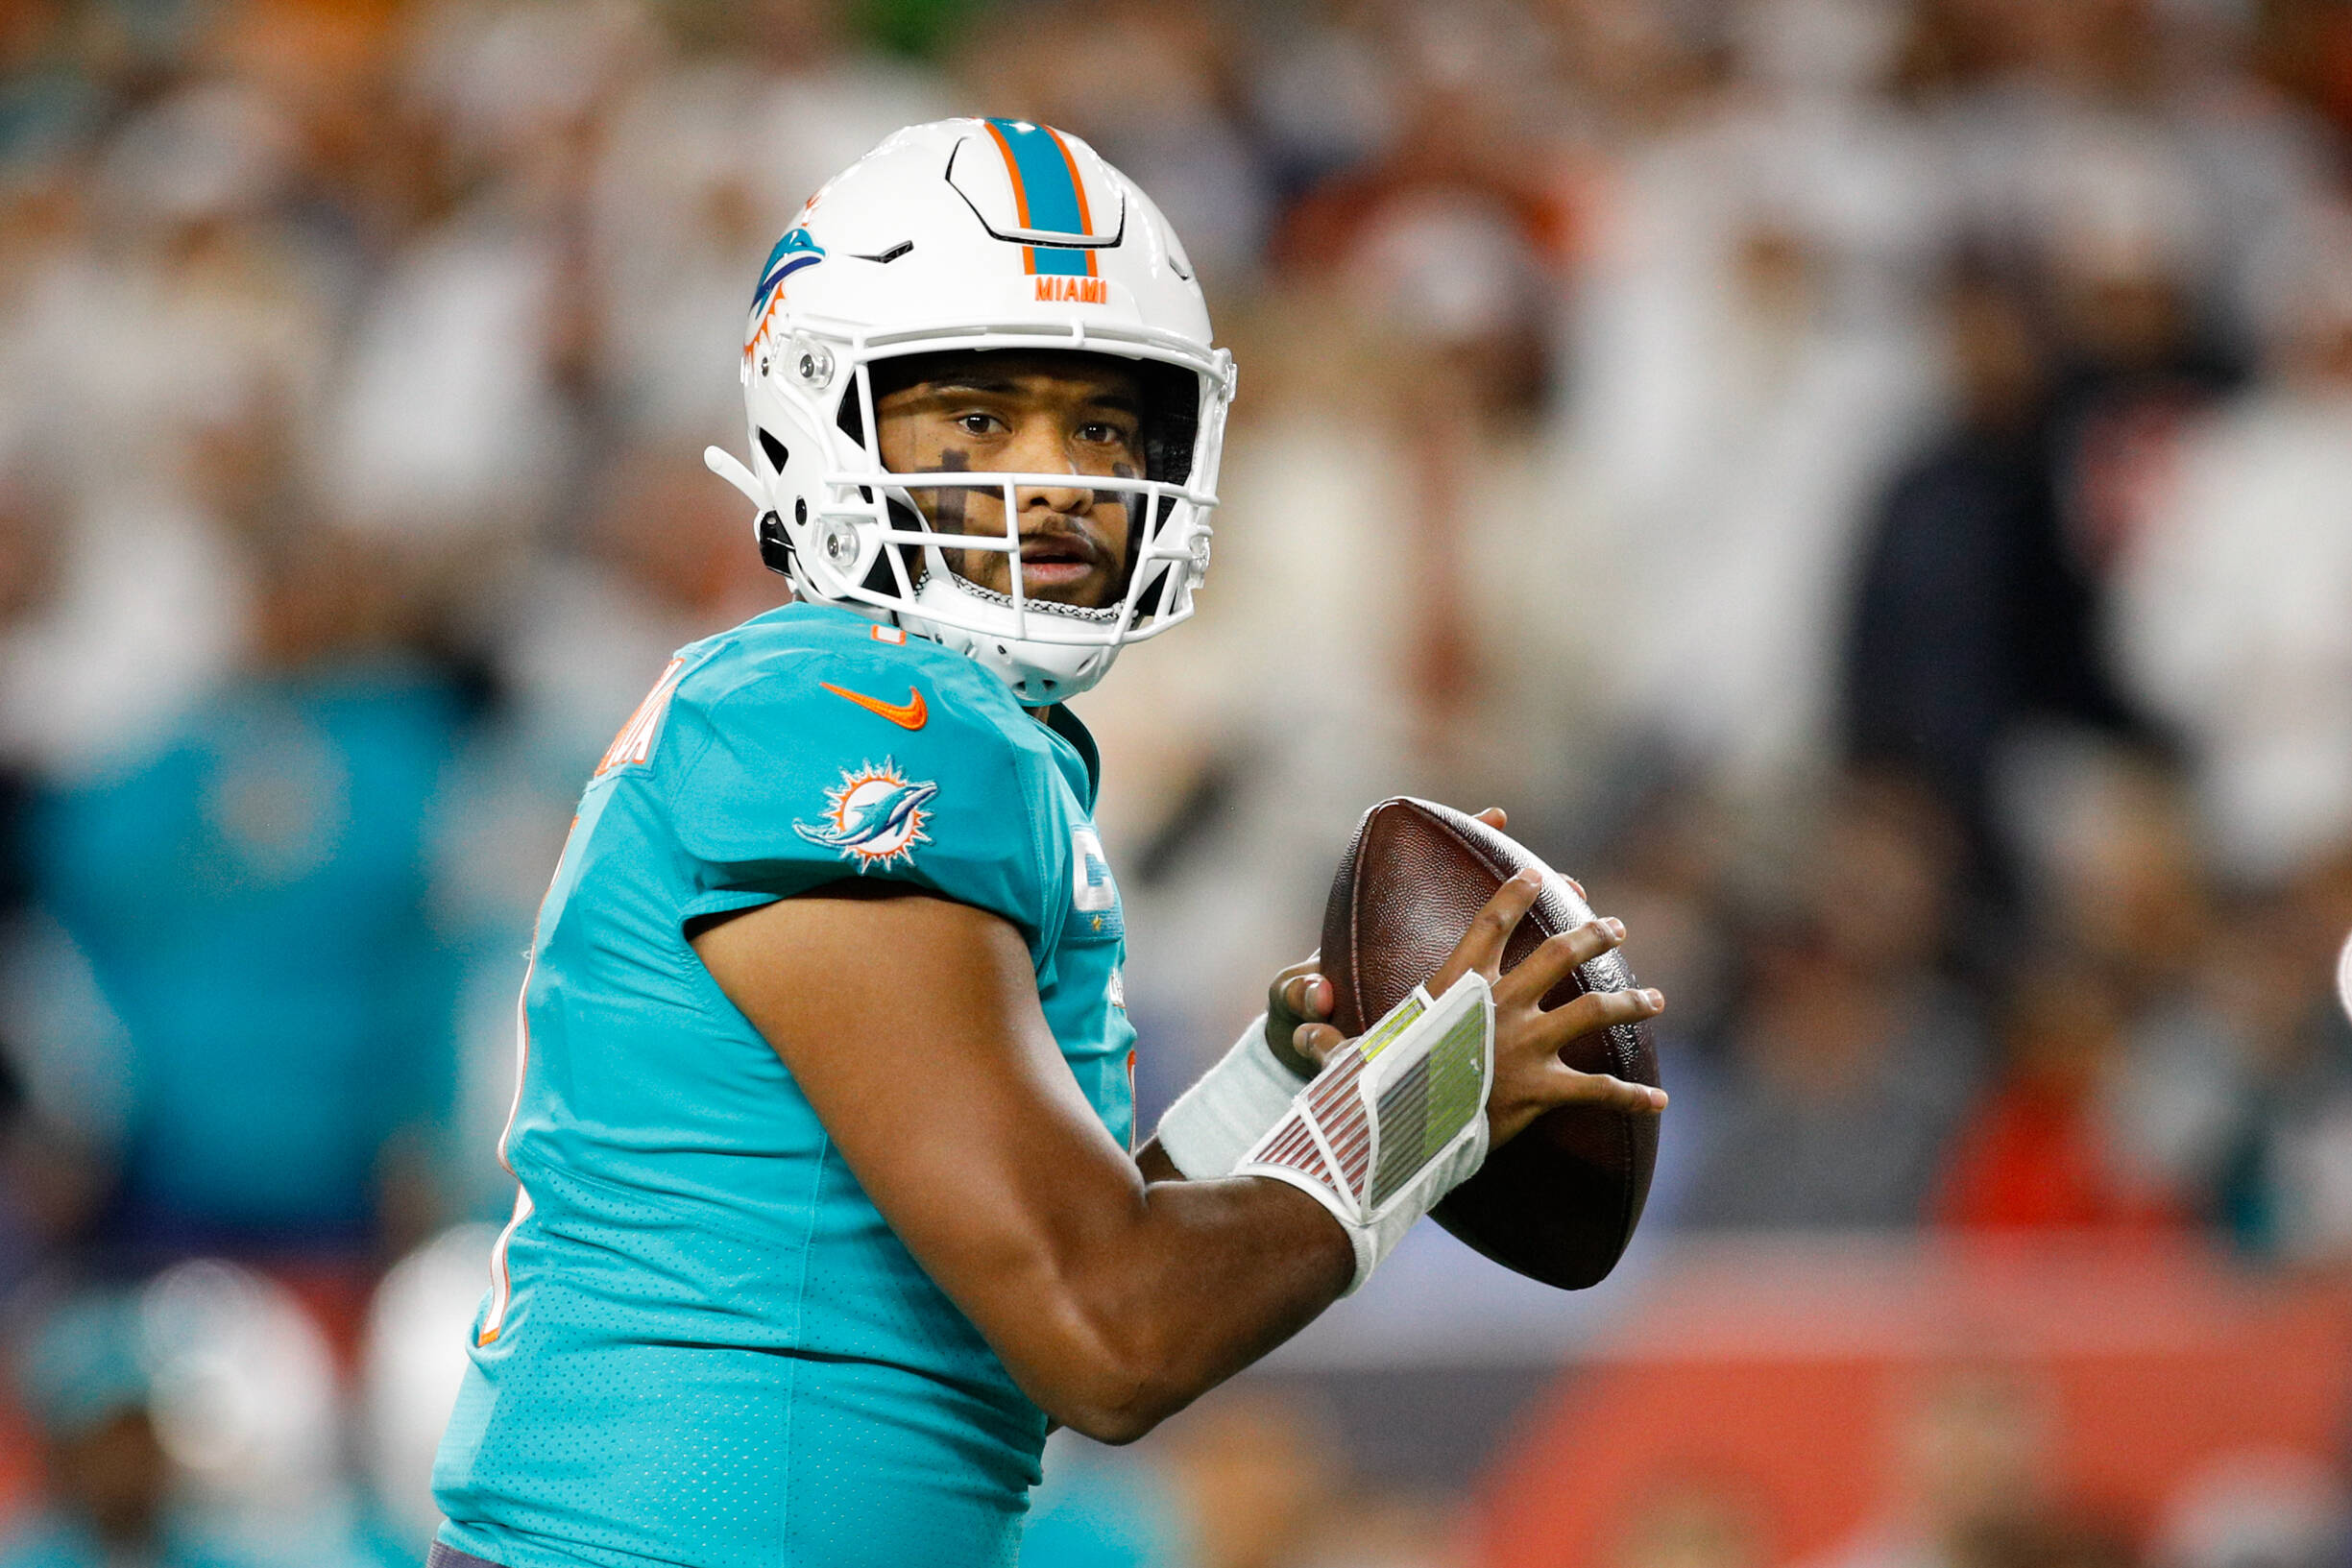 CINCINNATI, OH - SEPTEMBER 29: Miami Dolphins quarterback Tua Tagovailoa 1 looks to pass during the game against the Miami Dolphins and the Cincinnati Bengals on September 29, 2022, at Paycor Stadium in Cincinnati, OH. Photo by Ian Johnson/Icon Sportswire NFL, American Football Herren, USA SEP 29 Dolphins at Bengals Icon220929002